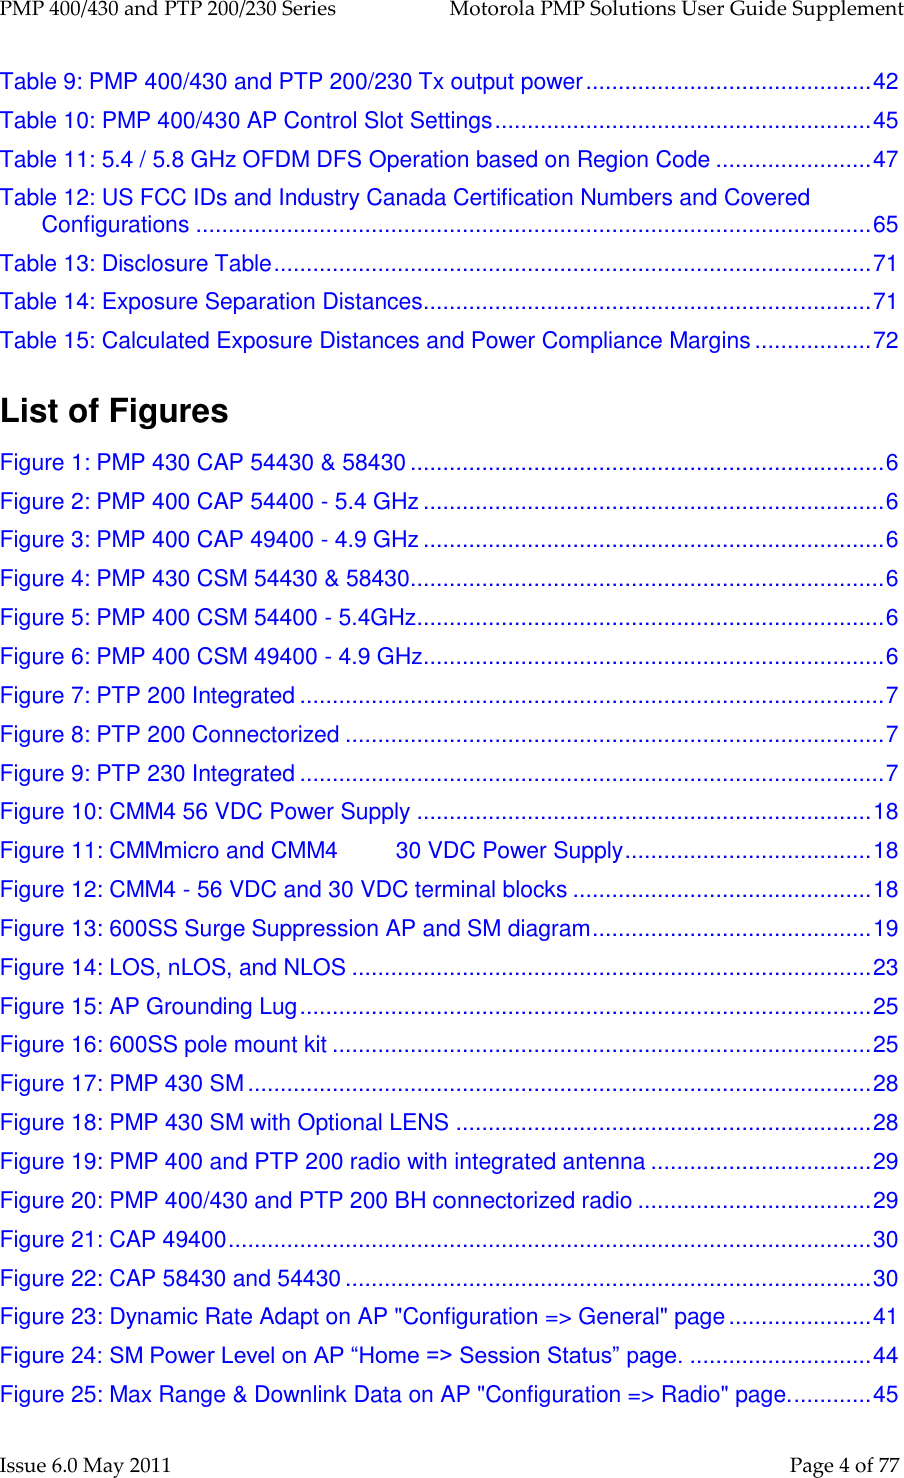 PMP 400/430 and PTP 200/230 Series   Motorola PMP Solutions User Guide Supplement Issue 6.0 May 2011    Page 4 of 77 Table 9: PMP 400/430 and PTP 200/230 Tx output power ............................................ 42 Table 10: PMP 400/430 AP Control Slot Settings .......................................................... 45 Table 11: 5.4 / 5.8 GHz OFDM DFS Operation based on Region Code ........................ 47 Table 12: US FCC IDs and Industry Canada Certification Numbers and Covered Configurations ........................................................................................................ 65 Table 13: Disclosure Table ............................................................................................ 71 Table 14: Exposure Separation Distances ..................................................................... 71 Table 15: Calculated Exposure Distances and Power Compliance Margins .................. 72  List of Figures Figure 1: PMP 430 CAP 54430 &amp; 58430 ......................................................................... 6 Figure 2: PMP 400 CAP 54400 - 5.4 GHz ....................................................................... 6 Figure 3: PMP 400 CAP 49400 - 4.9 GHz ....................................................................... 6 Figure 4: PMP 430 CSM 54430 &amp; 58430 ......................................................................... 6 Figure 5: PMP 400 CSM 54400 - 5.4GHz ........................................................................ 6 Figure 6: PMP 400 CSM 49400 - 4.9 GHz ....................................................................... 6 Figure 7: PTP 200 Integrated .......................................................................................... 7 Figure 8: PTP 200 Connectorized ................................................................................... 7 Figure 9: PTP 230 Integrated .......................................................................................... 7 Figure 10: CMM4 56 VDC Power Supply ...................................................................... 18 Figure 11: CMMmicro and CMM4         30 VDC Power Supply ...................................... 18 Figure 12: CMM4 - 56 VDC and 30 VDC terminal blocks .............................................. 18 Figure 13: 600SS Surge Suppression AP and SM diagram ........................................... 19 Figure 14: LOS, nLOS, and NLOS ................................................................................ 23 Figure 15: AP Grounding Lug ........................................................................................ 25 Figure 16: 600SS pole mount kit ................................................................................... 25 Figure 17: PMP 430 SM ................................................................................................ 28 Figure 18: PMP 430 SM with Optional LENS ................................................................ 28 Figure 19: PMP 400 and PTP 200 radio with integrated antenna .................................. 29 Figure 20: PMP 400/430 and PTP 200 BH connectorized radio .................................... 29 Figure 21: CAP 49400 ................................................................................................... 30 Figure 22: CAP 58430 and 54430 ................................................................................. 30 Figure 23: Dynamic Rate Adapt on AP &quot;Configuration =&gt; General&quot; page ...................... 41 Figure 24: SM Power Level on AP “Home =&gt; Session Status” page. ............................ 44 Figure 25: Max Range &amp; Downlink Data on AP &quot;Configuration =&gt; Radio&quot; page. ............ 45 